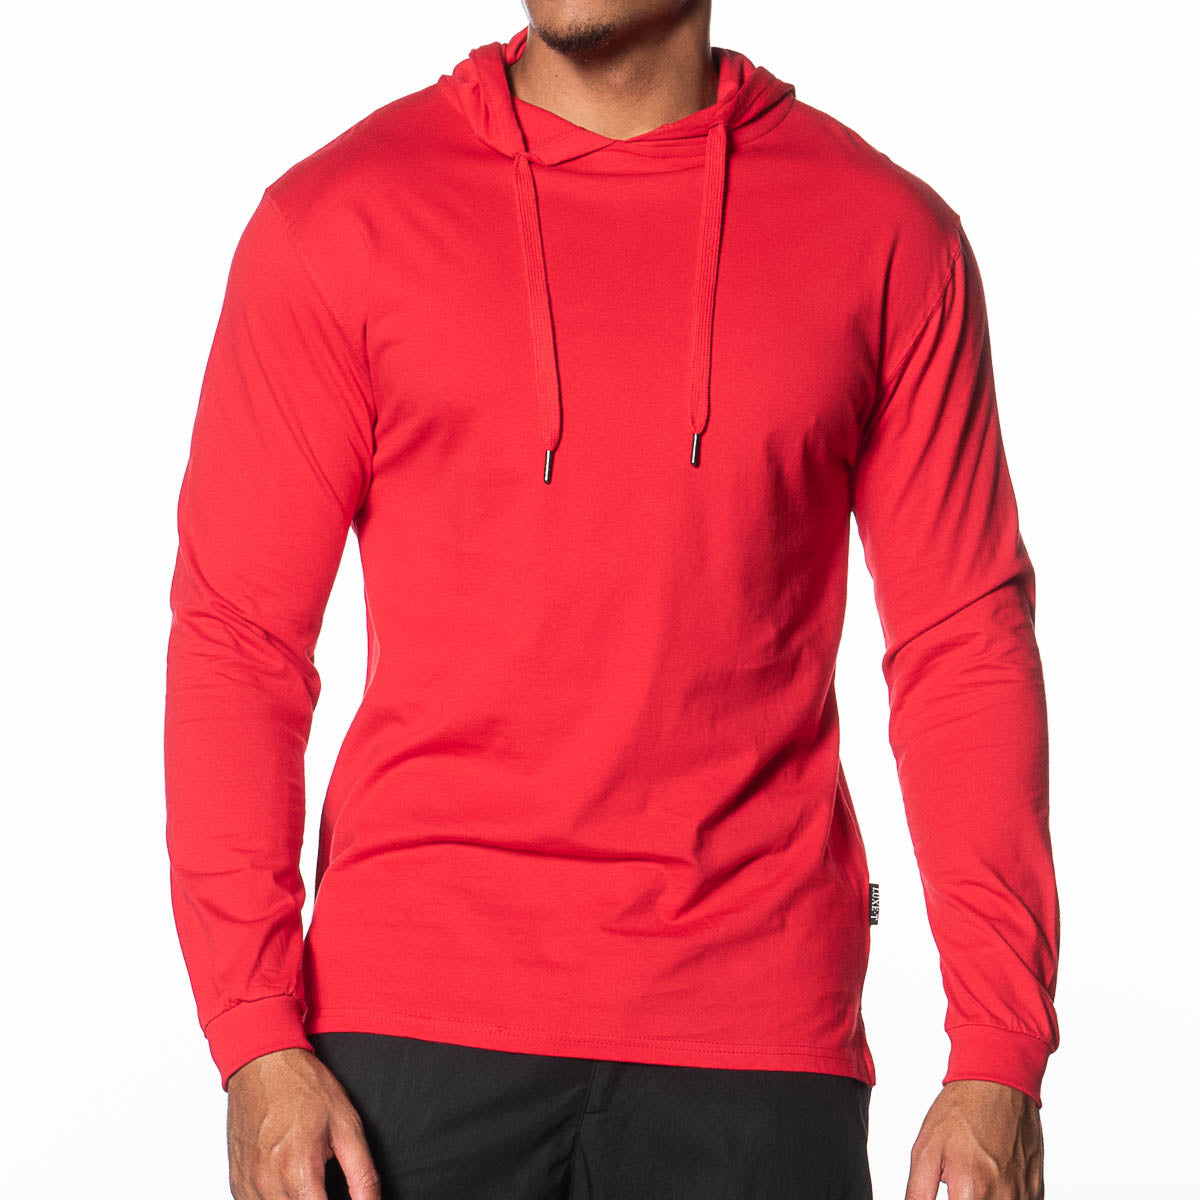 Men's Basic Classic Fit Long Sleeve Hooded T-Shirt Red / 3X